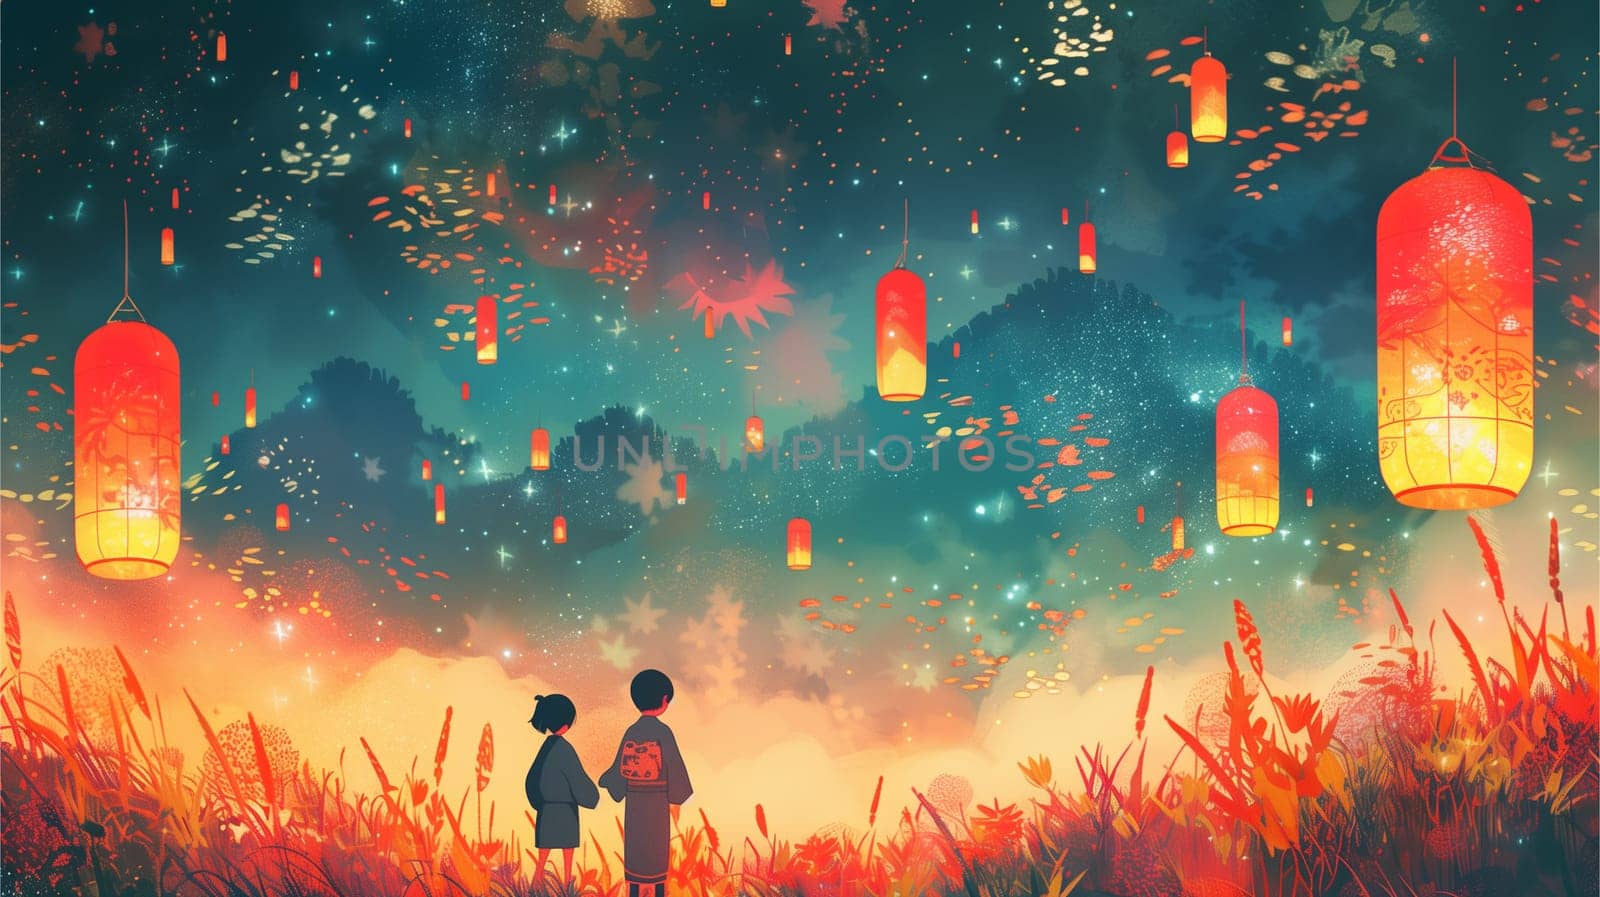 Two individuals stand facing a sky illuminated by countless lanterns. The scene depicts a moment of awe and wonder amidst the glowing lights.